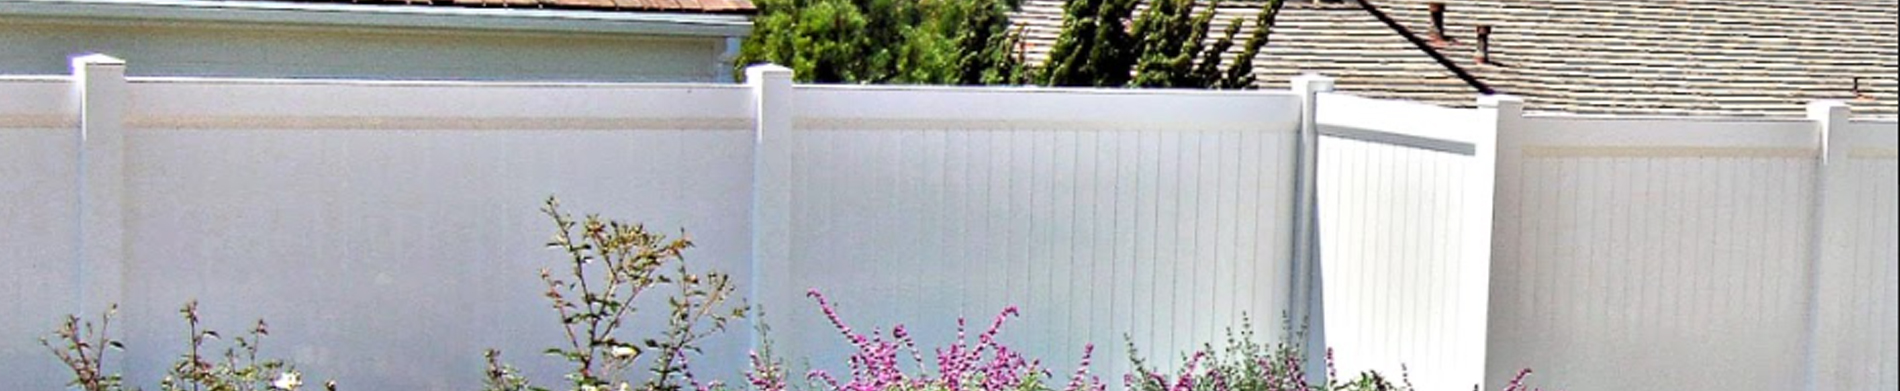 Enjoy unlimited privacy by installing a privacy fence panel from Duramax